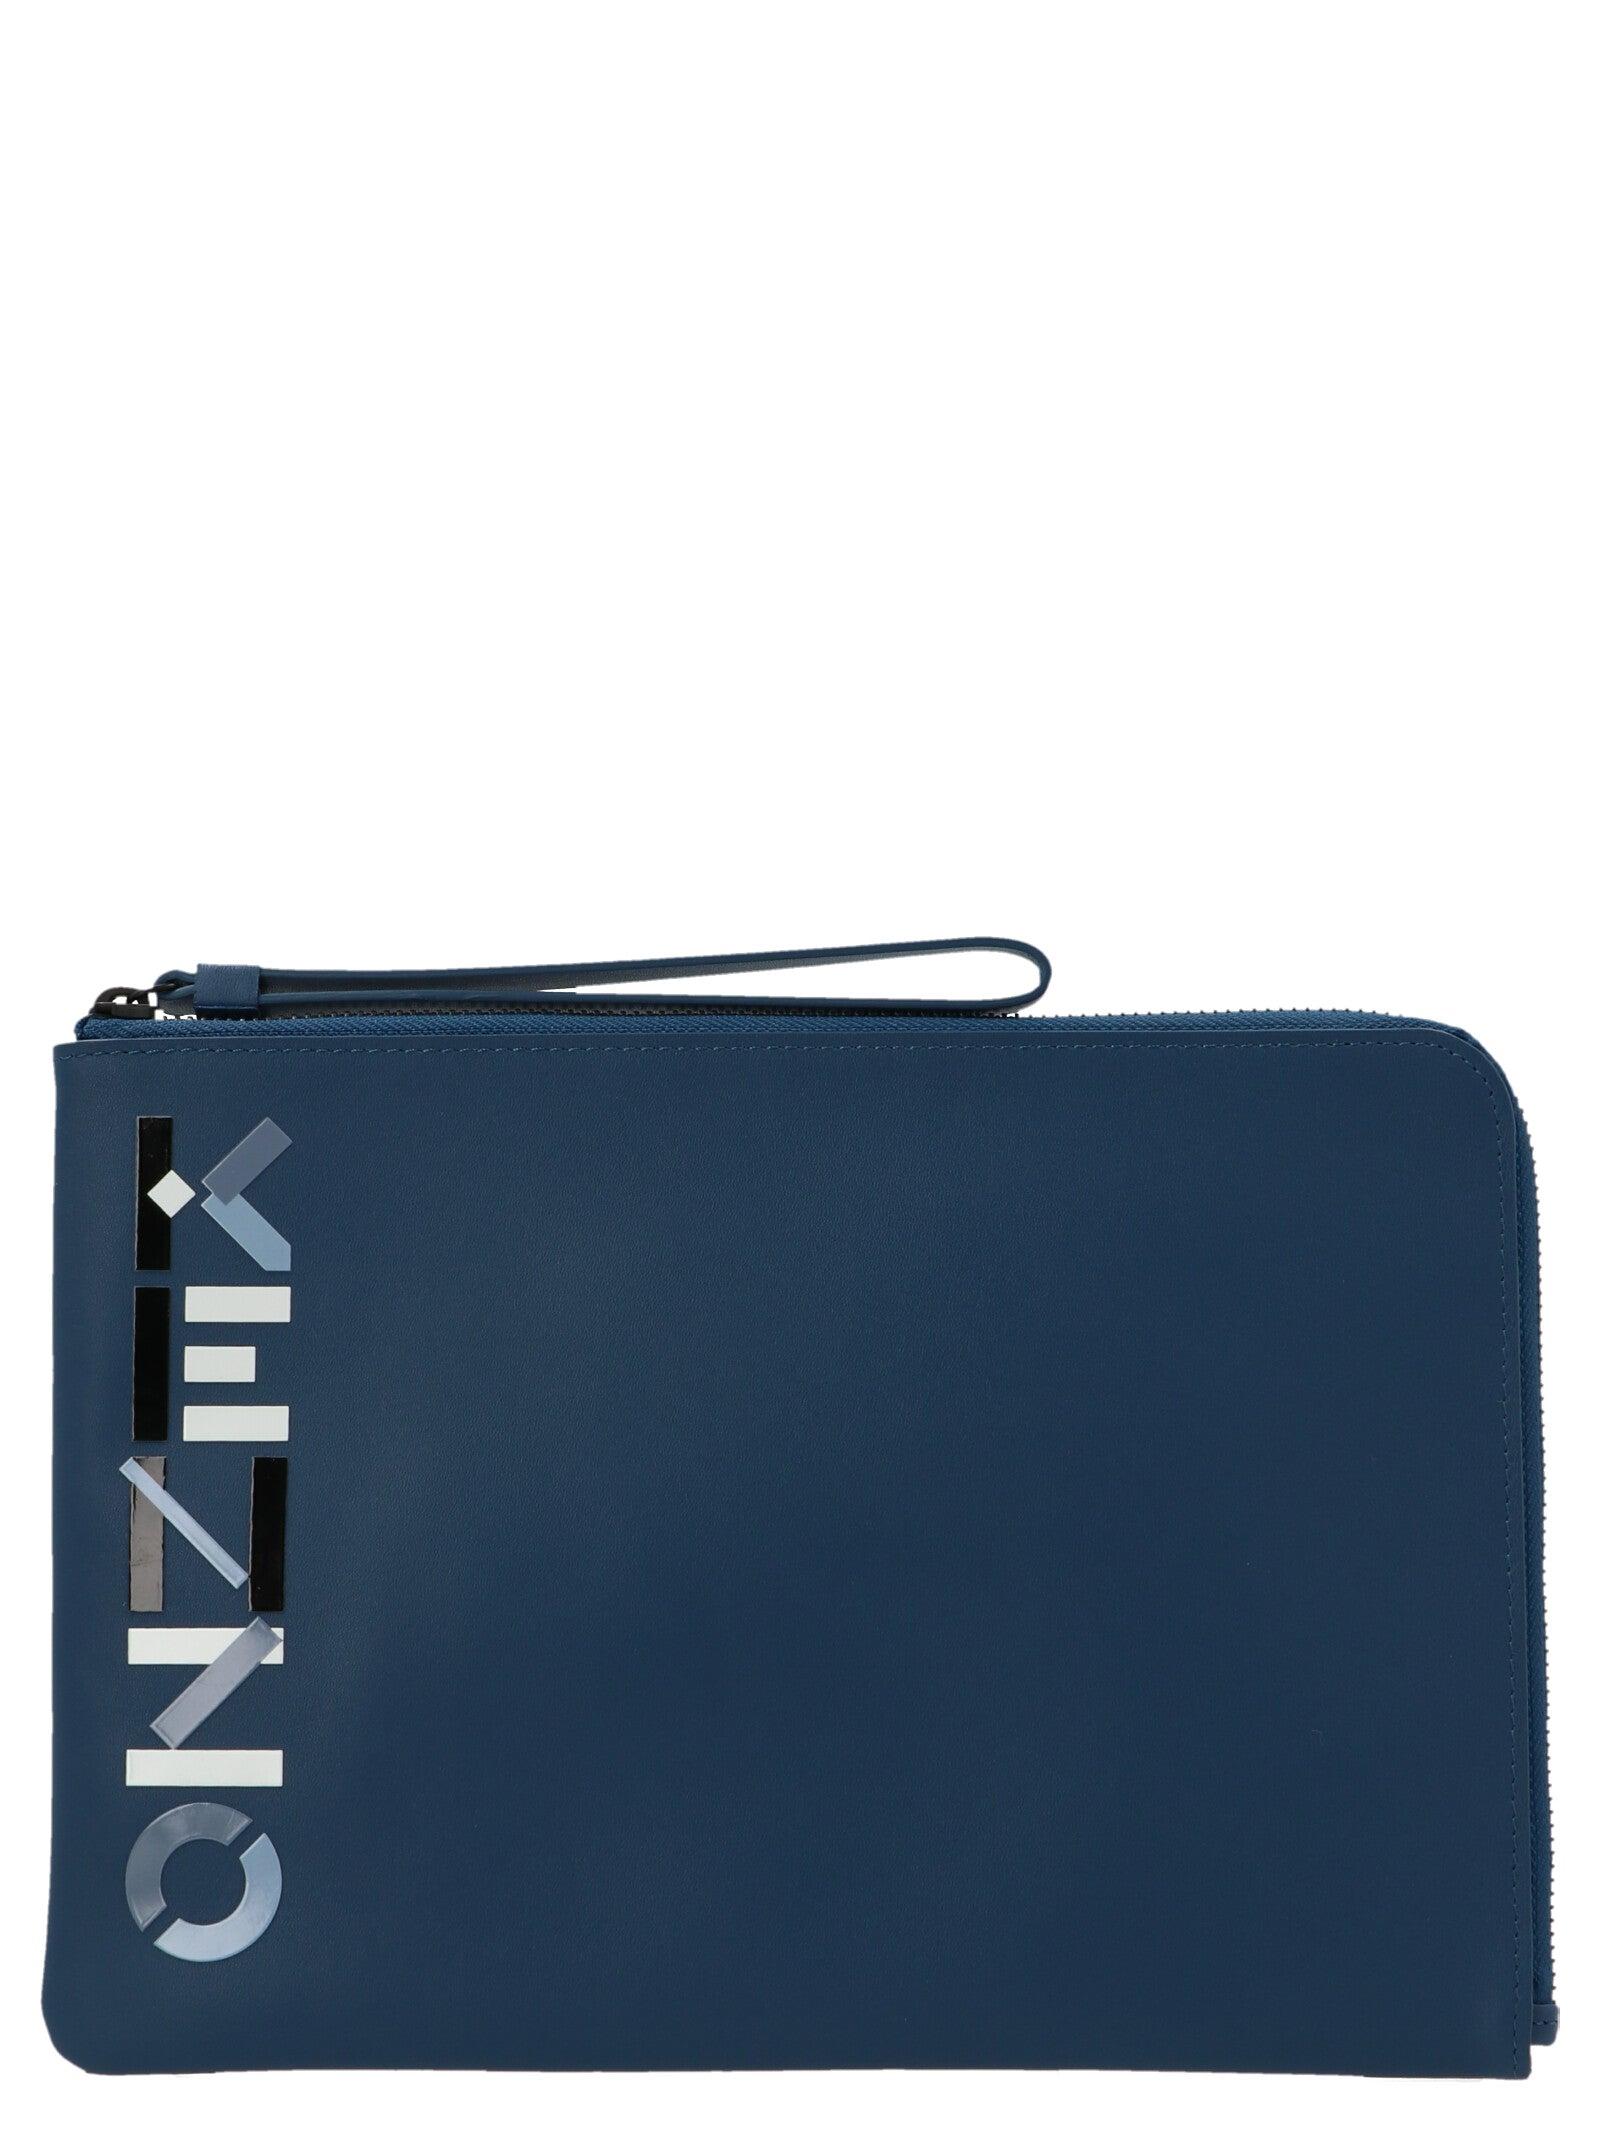 KENZO Leather The Winter Capsule Large Clutch Bag in Blue for Men 